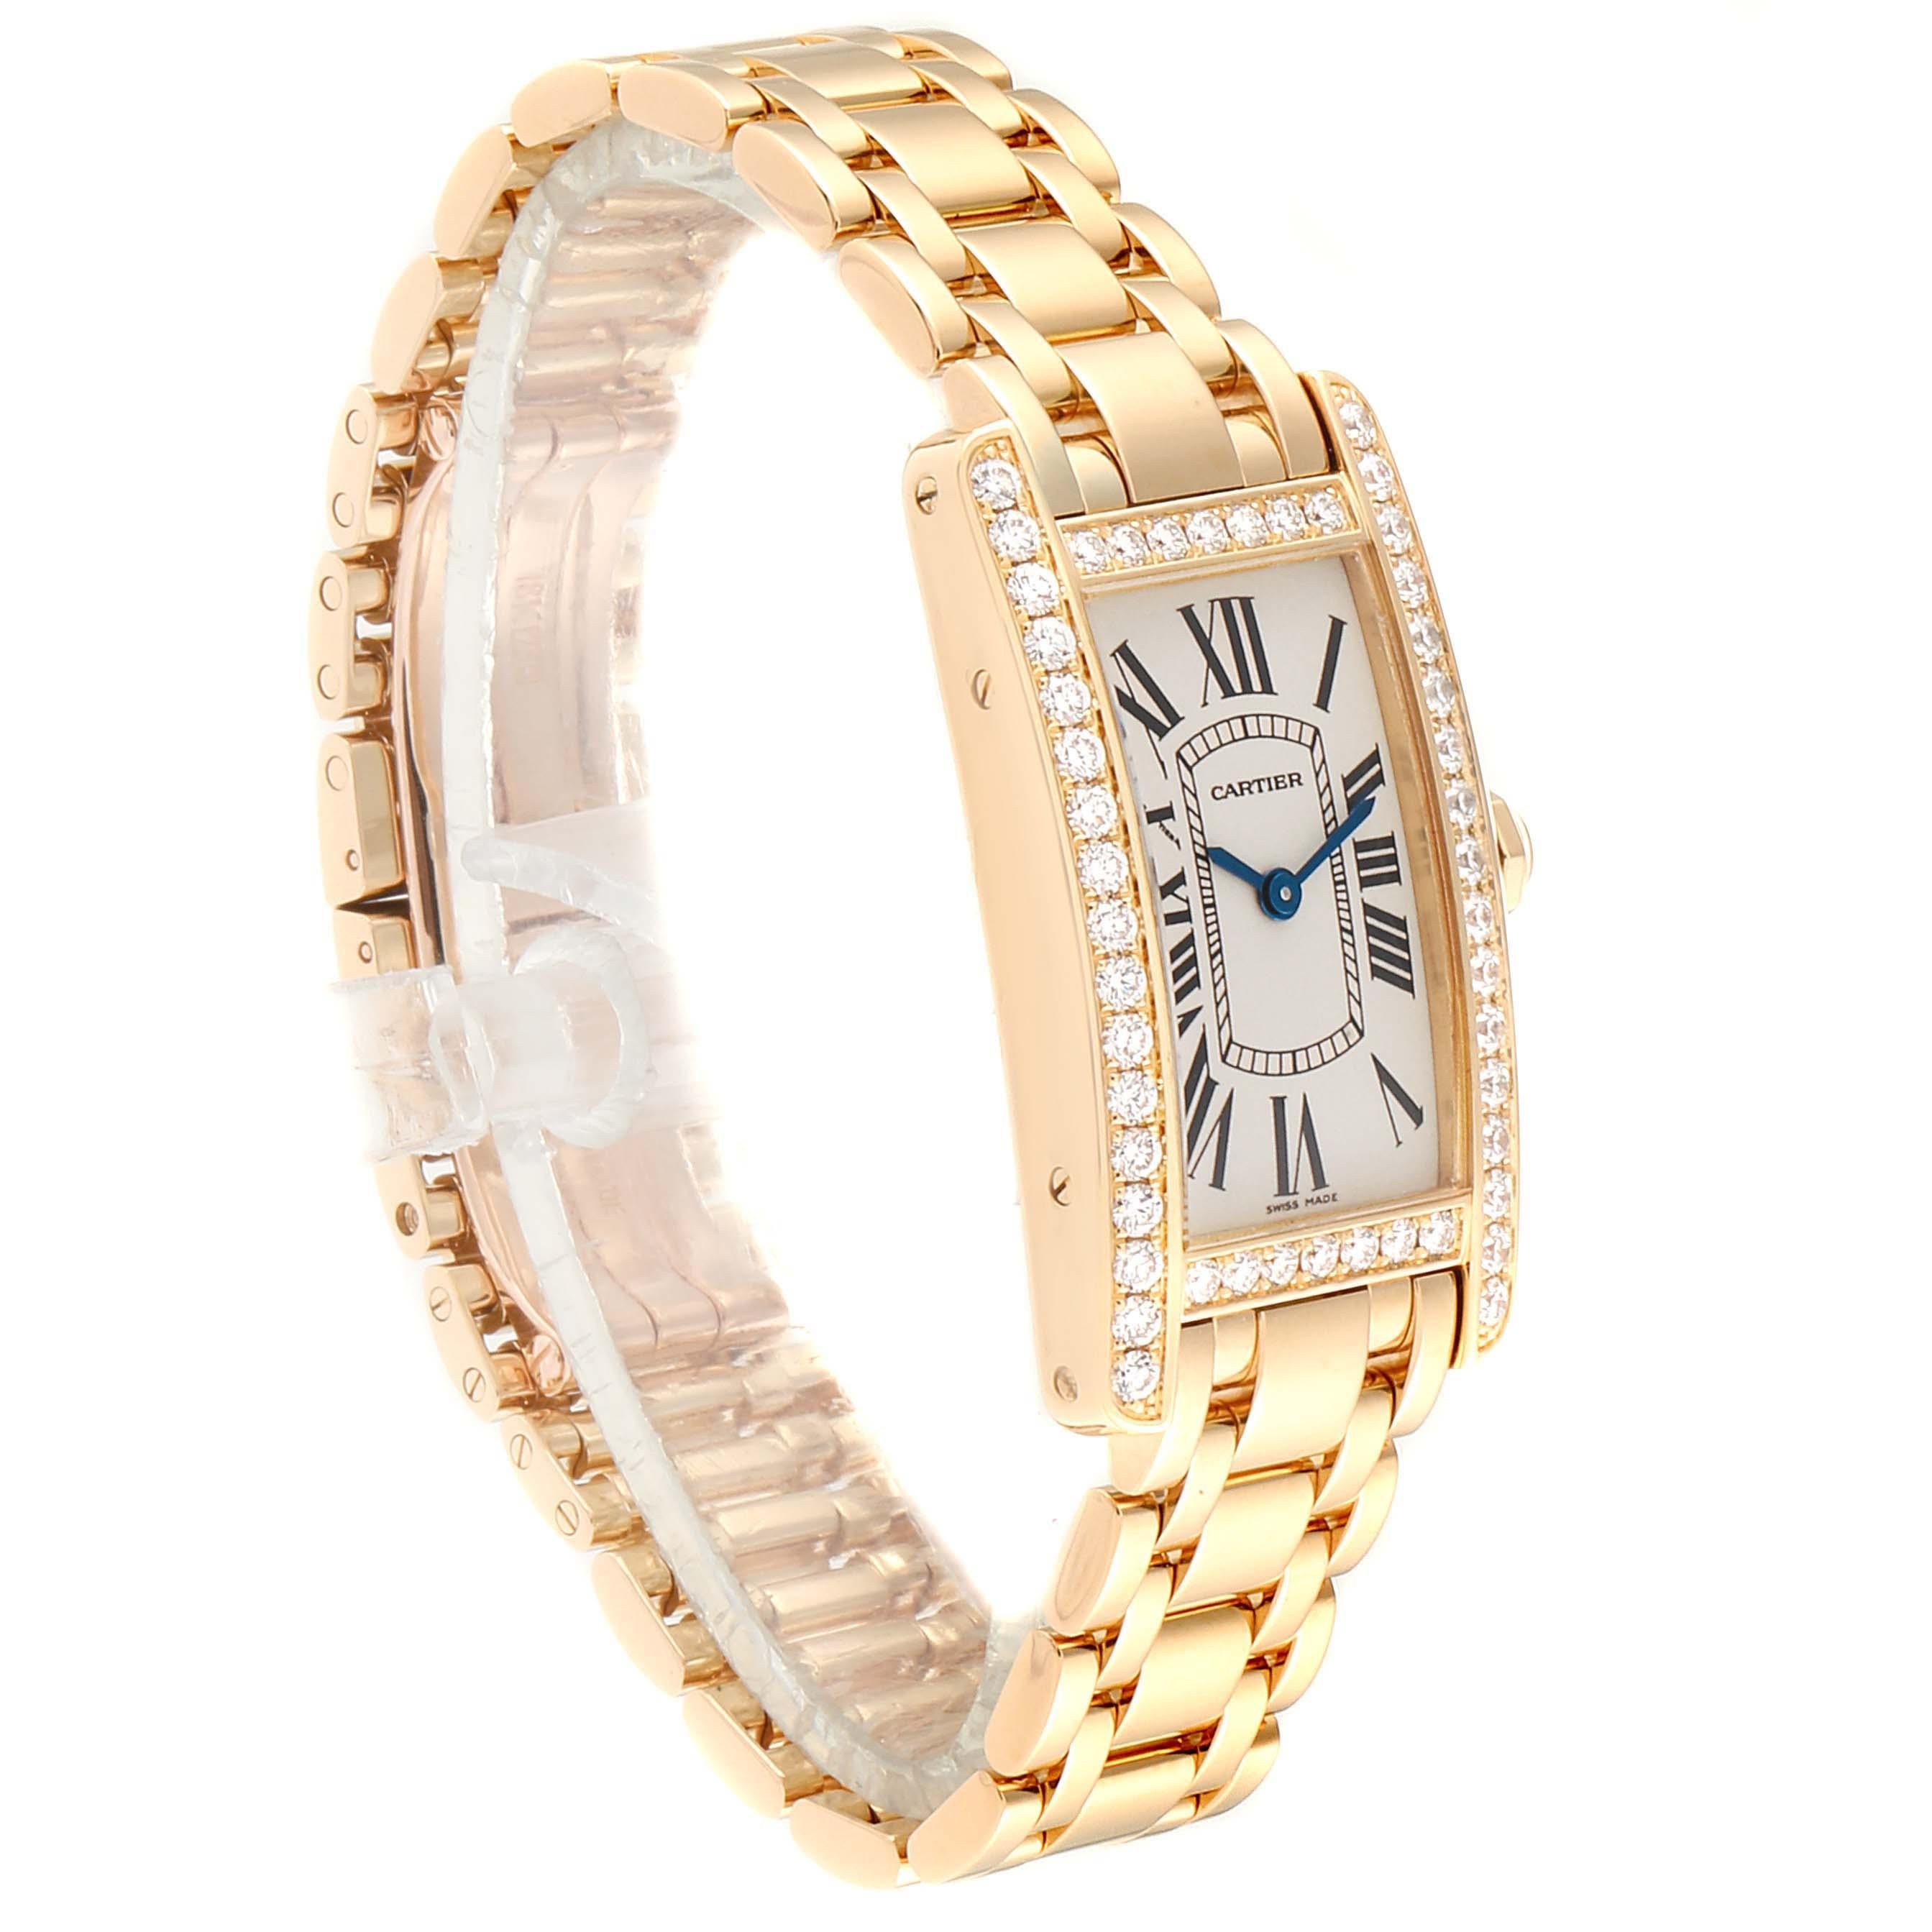 Brilliant Cut Cartier Tank Americaine Yellow Gold Diamond Ladies Watch WB7072K2 Box Papers For Sale